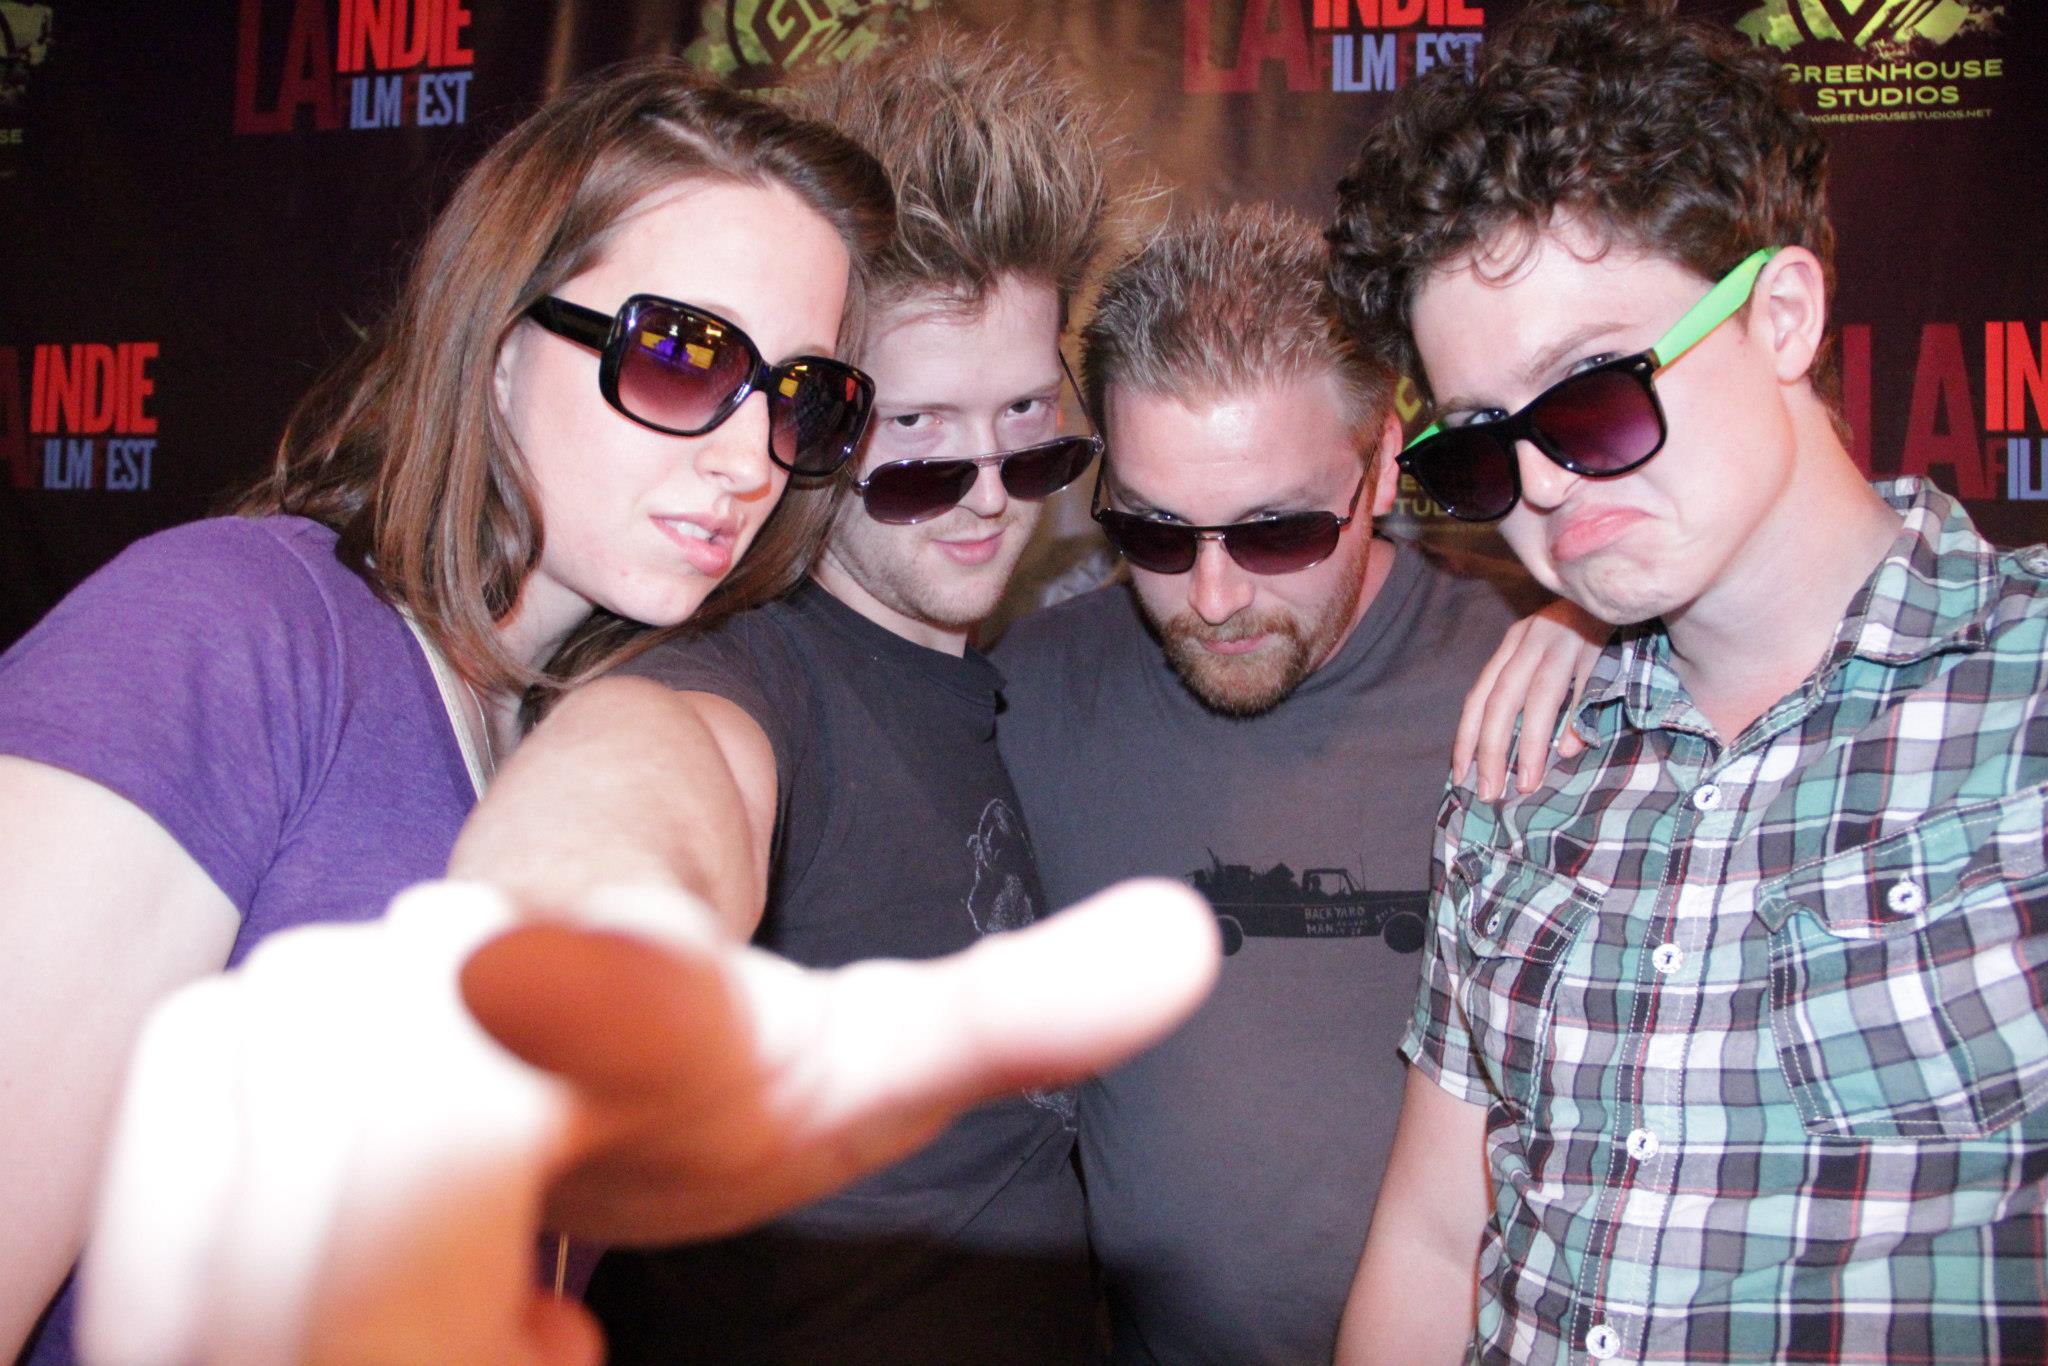 Left to Right, Beth Meberg, Alex Meader, Fred Beahm, and Connor Hair at the 2012 LA Indie Film Fest.